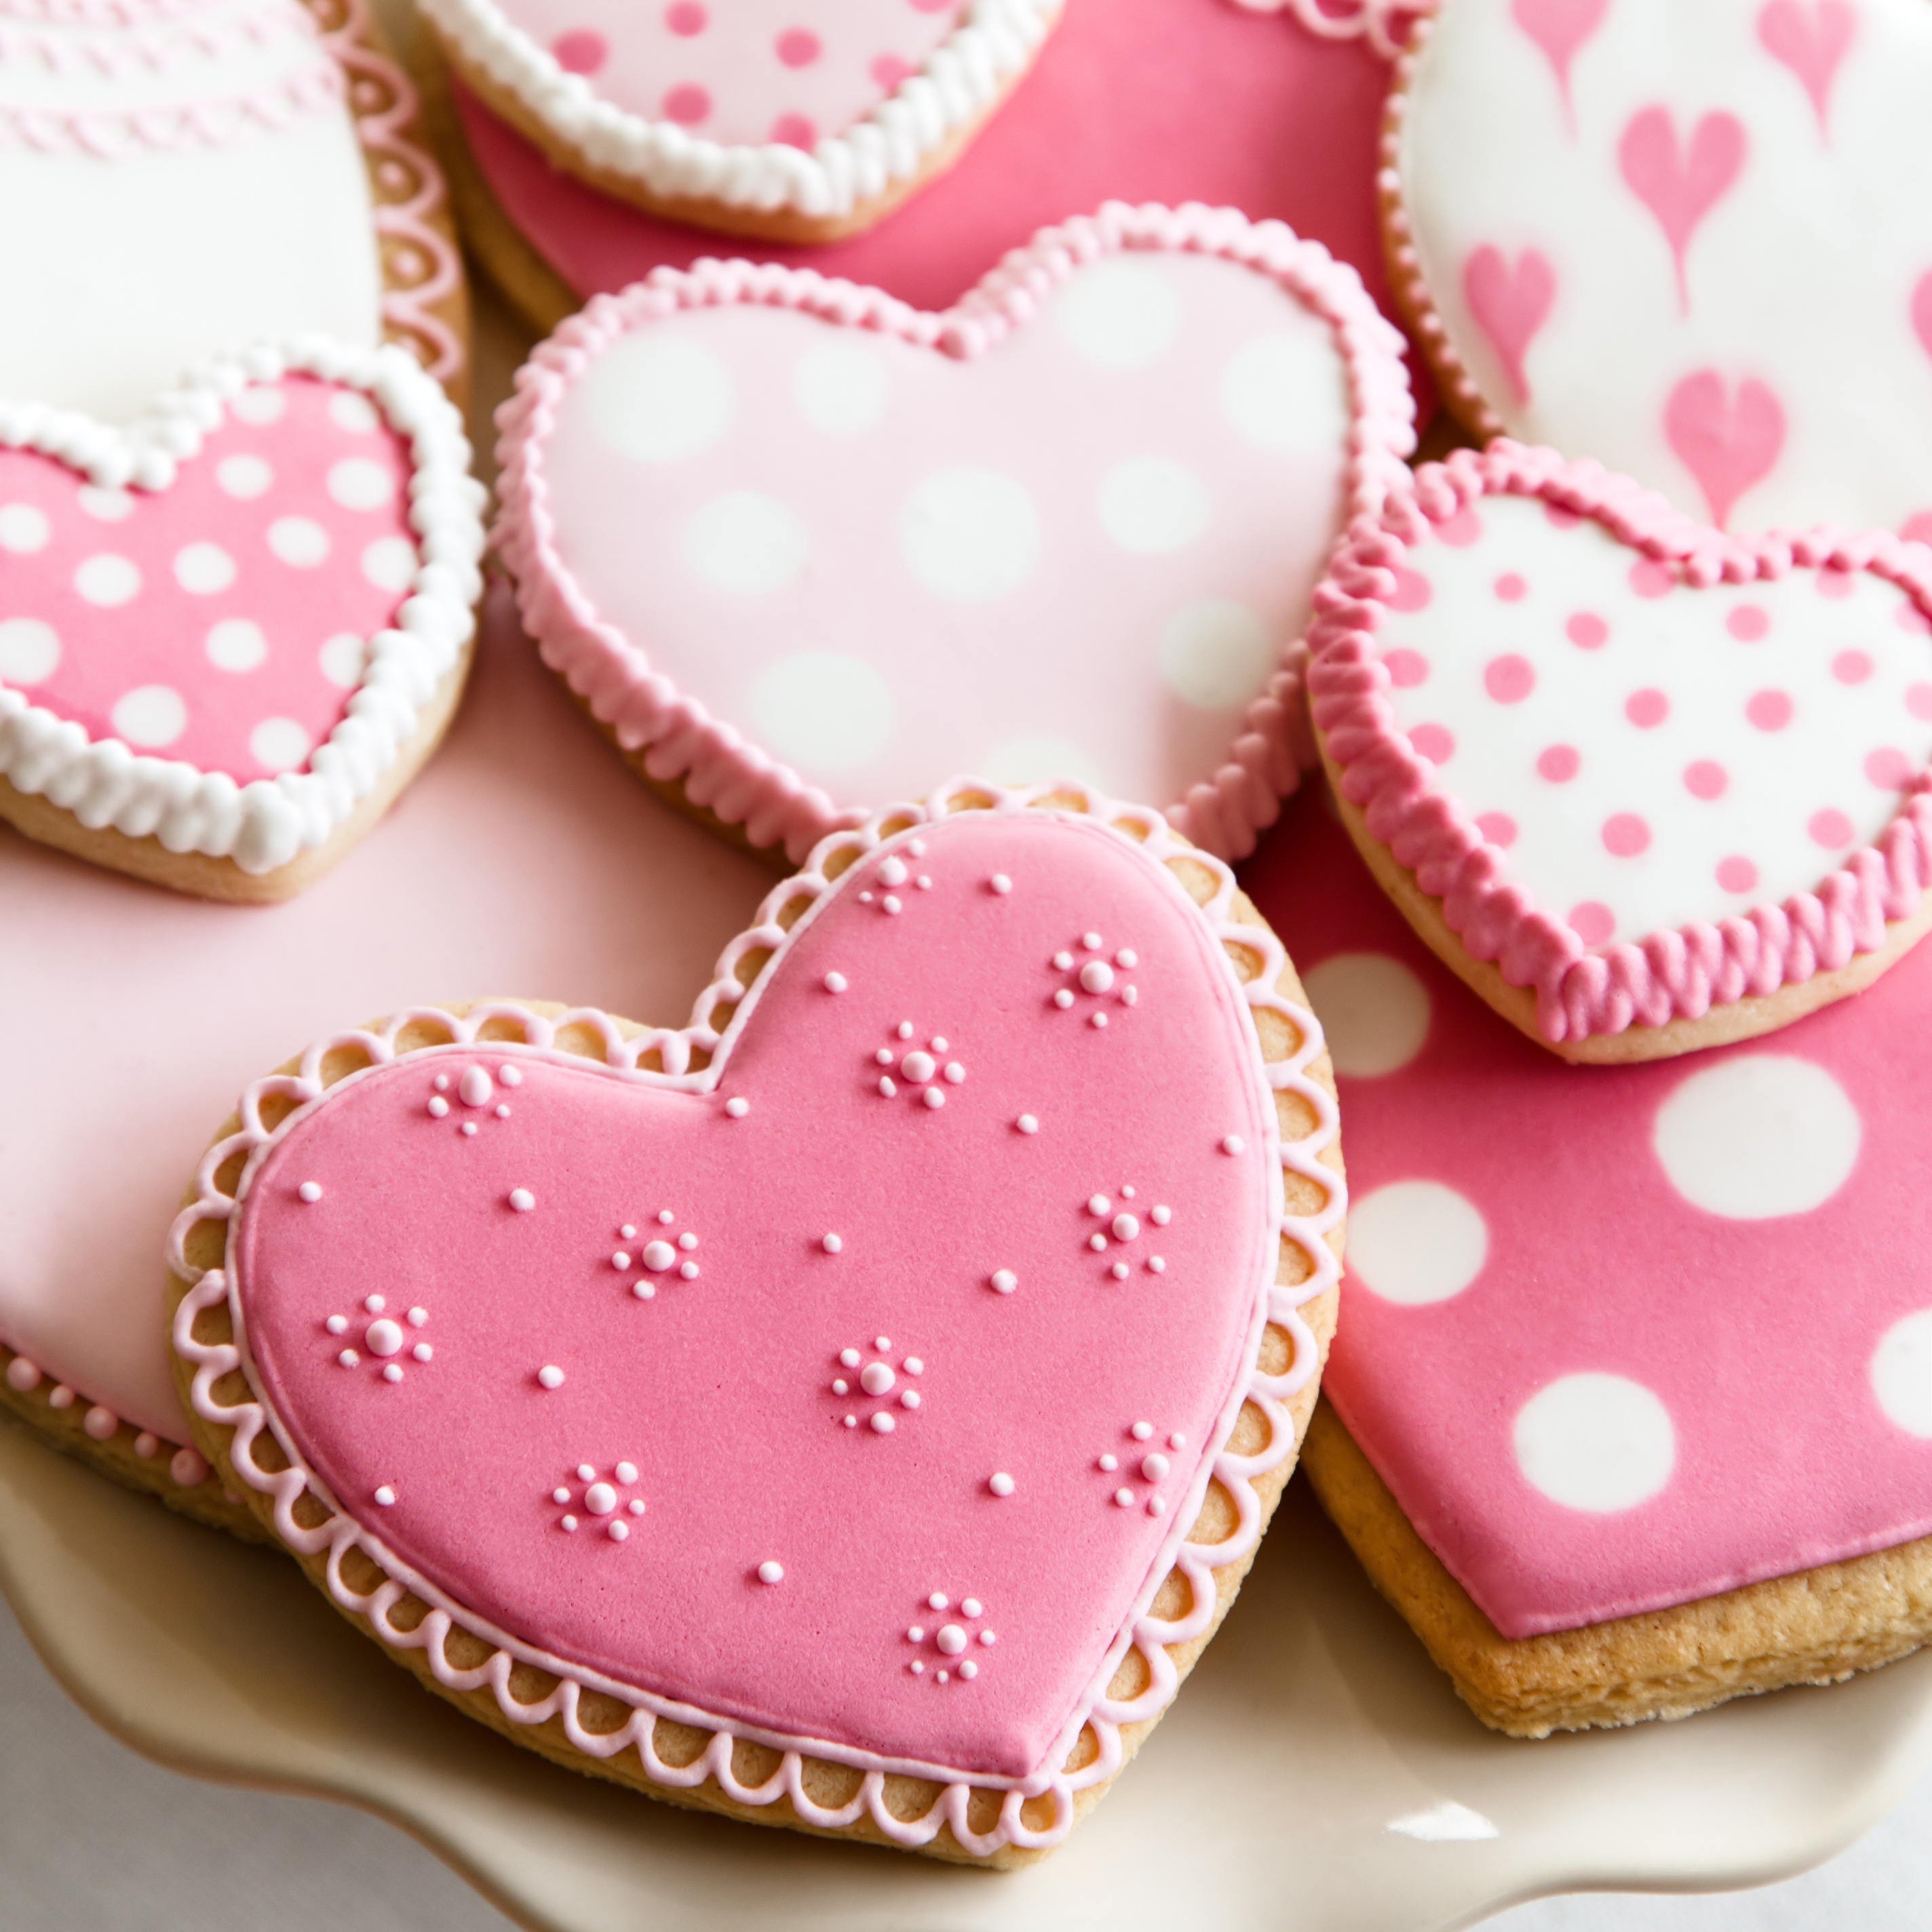 pink and white decorated heart shaped cookies